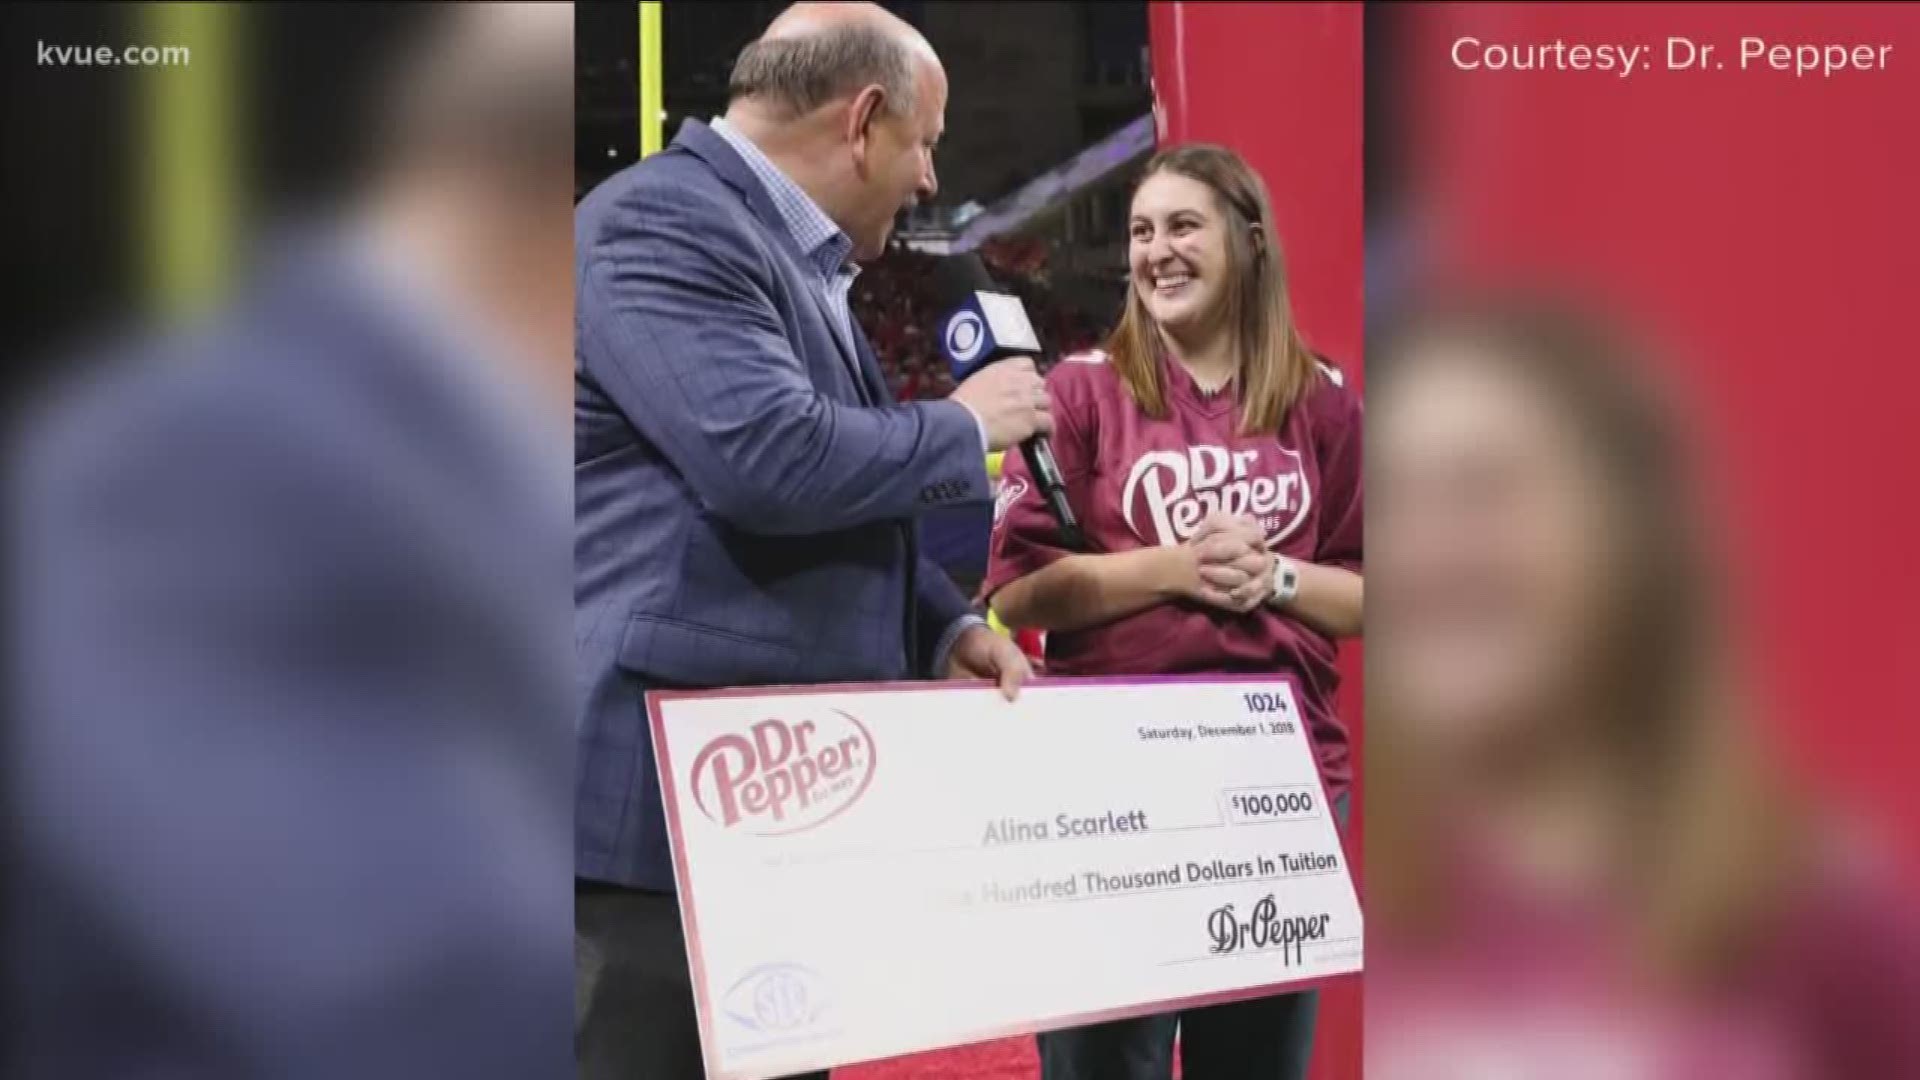 A UT student can say goodbye to her student loans. She won $100,000 at a football game and she has Dr. Pepper to thank.